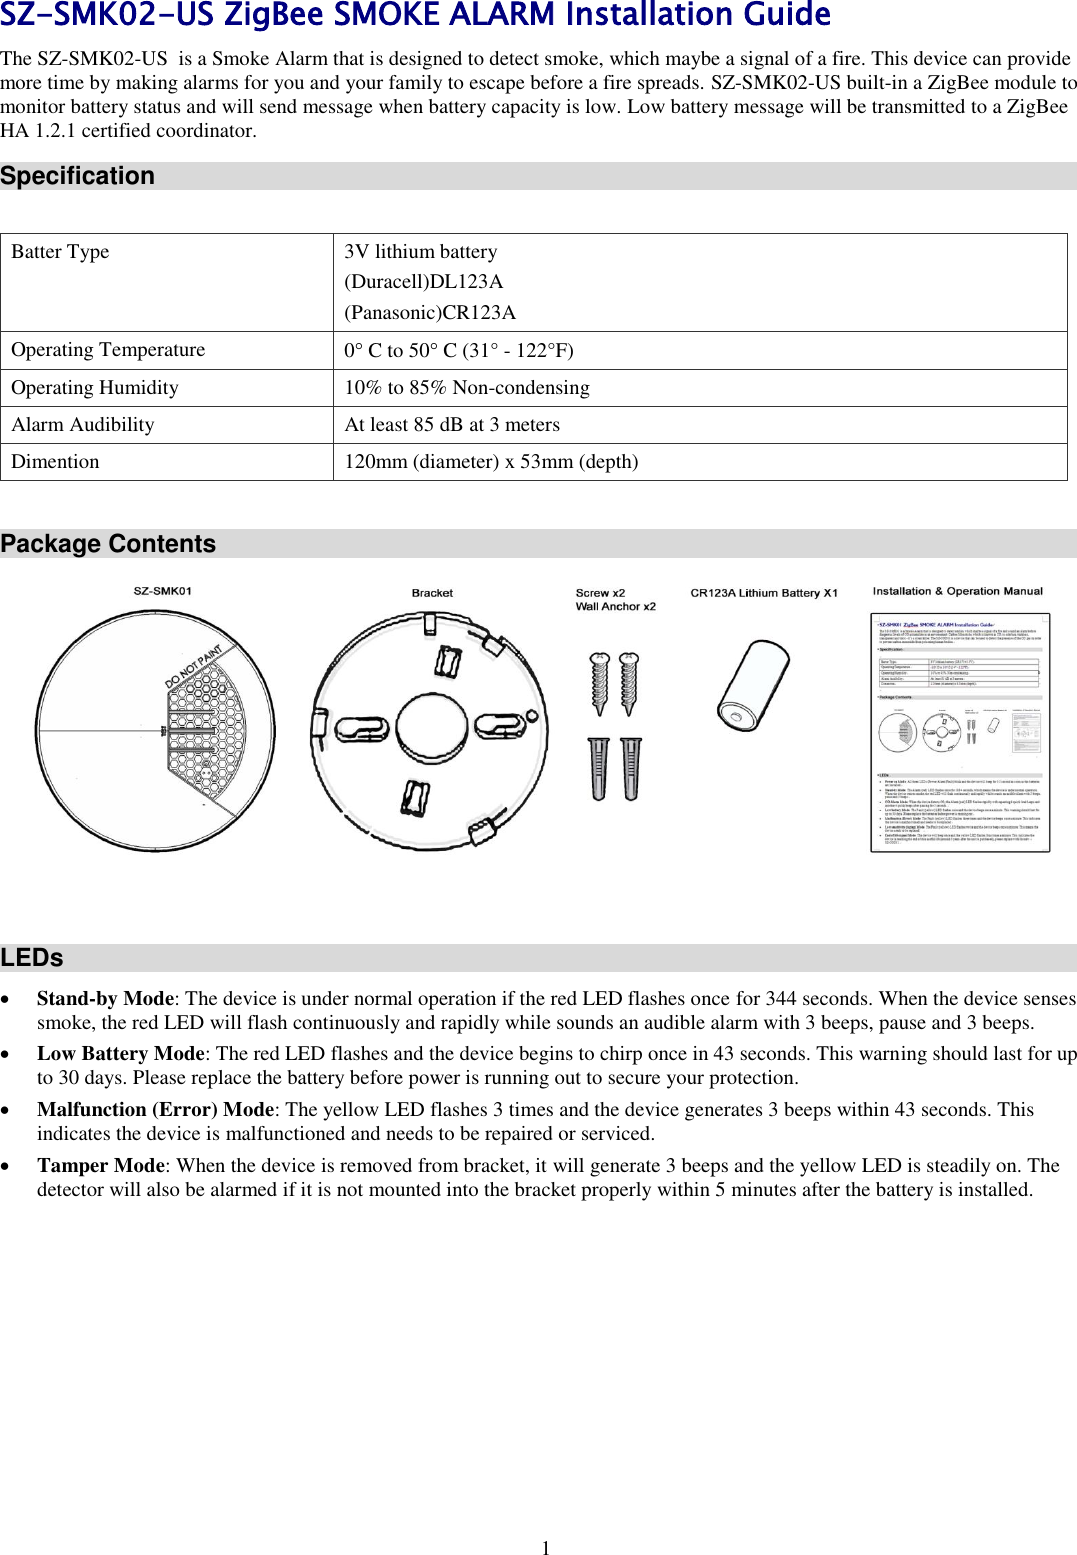 1 SZ-SMK02-US ZigBee SMOKE ALARM Installation Guide The SZ-SMK02-US  is a Smoke Alarm that is designed to detect smoke, which maybe a signal of a fire. This device can provide more time by making alarms for you and your family to escape before a fire spreads. SZ-SMK02-US built-in a ZigBee module to monitor battery status and will send message when battery capacity is low. Low battery message will be transmitted to a ZigBee HA 1.2.1 certified coordinator.  Specification  Batter Type 3V lithium battery (Duracell)DL123A  (Panasonic)CR123A  Operating Temperature 0 C to 50 C (31° - 122°F) Operating Humidity 10% to 85% Non-condensing Alarm Audibility At least 85 dB at 3 meters Dimention 120mm (diameter) x 53mm (depth)  Package Contents    LEDs  Stand-by Mode: The device is under normal operation if the red LED flashes once for 344 seconds. When the device senses smoke, the red LED will flash continuously and rapidly while sounds an audible alarm with 3 beeps, pause and 3 beeps.  Low Battery Mode: The red LED flashes and the device begins to chirp once in 43 seconds. This warning should last for up to 30 days. Please replace the battery before power is running out to secure your protection.   Malfunction (Error) Mode: The yellow LED flashes 3 times and the device generates 3 beeps within 43 seconds. This indicates the device is malfunctioned and needs to be repaired or serviced.   Tamper Mode: When the device is removed from bracket, it will generate 3 beeps and the yellow LED is steadily on. The detector will also be alarmed if it is not mounted into the bracket properly within 5 minutes after the battery is installed. 